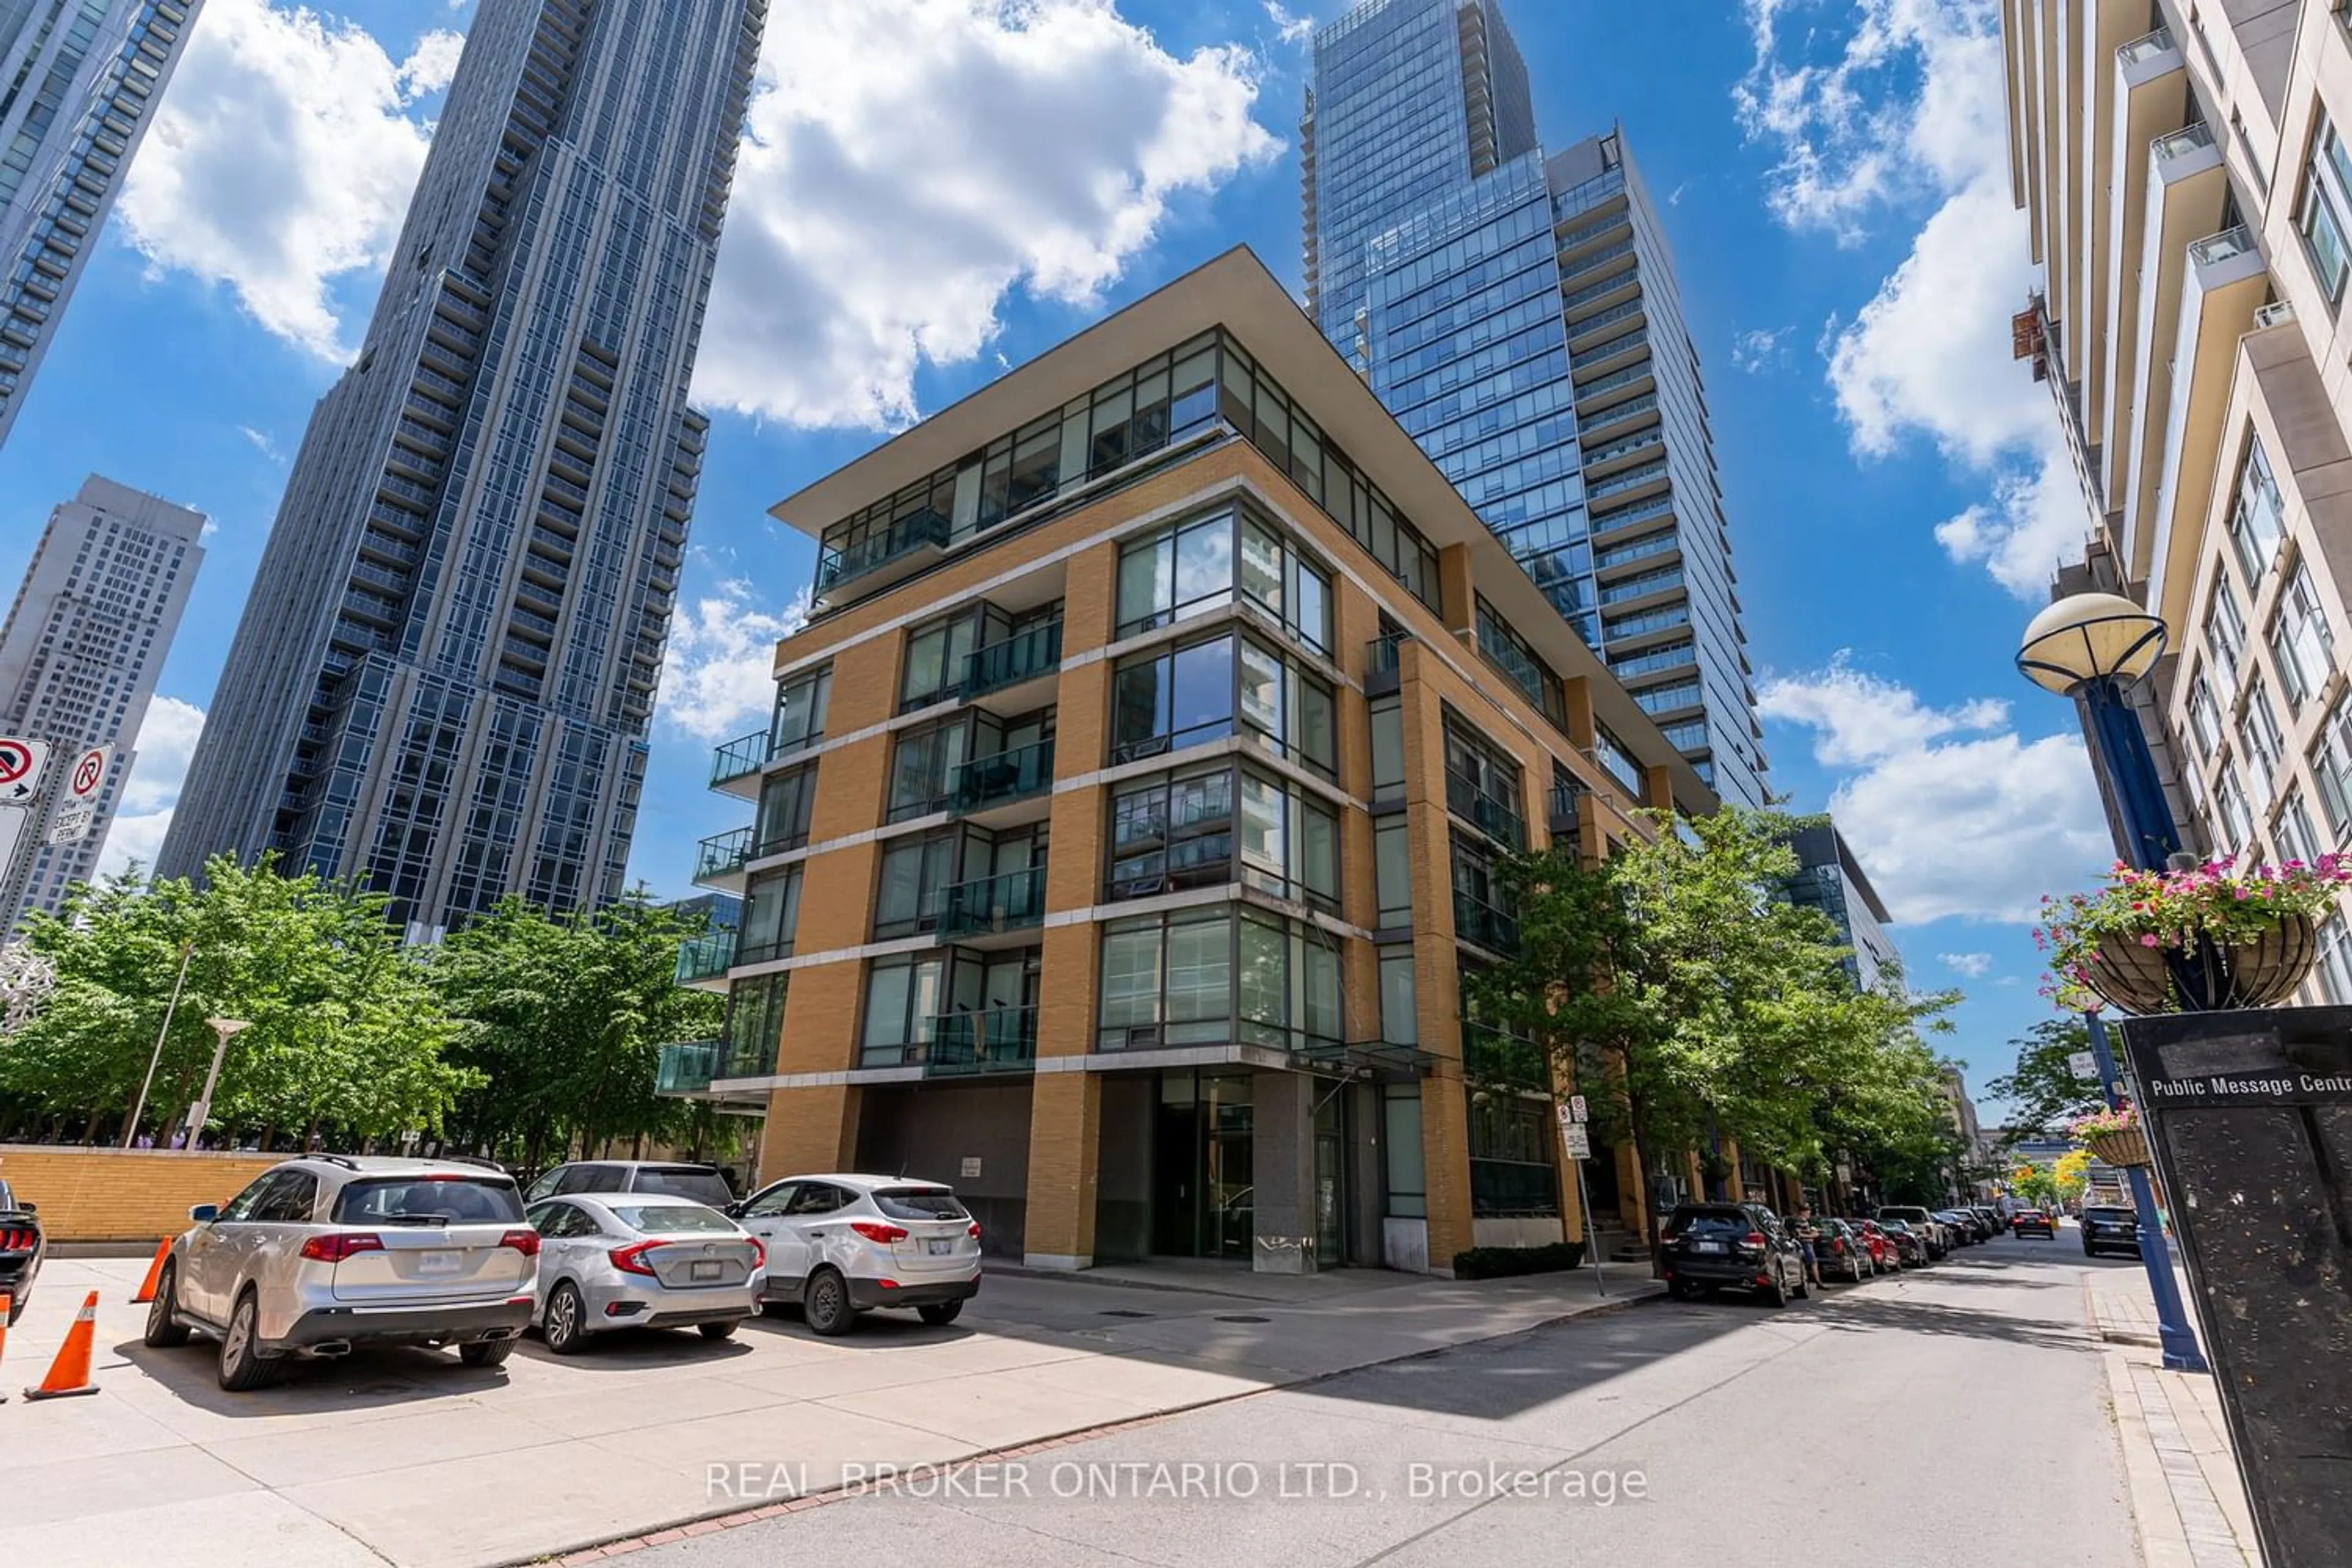 A pic from exterior of the house or condo for 21 Scollard St #104, Toronto Ontario M5R 1G1